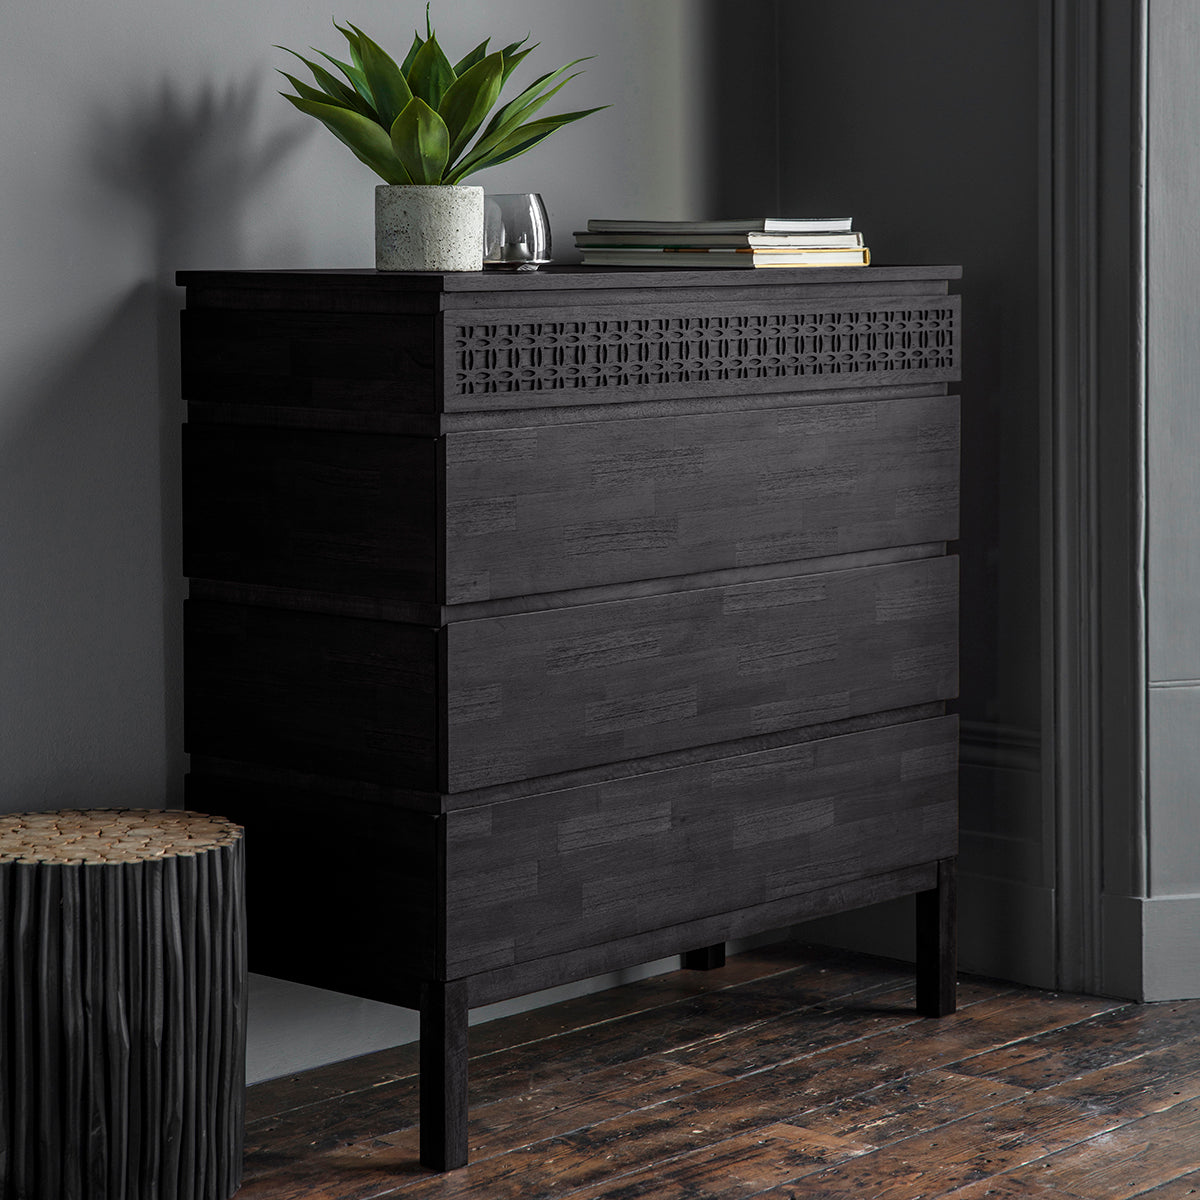 Magnificent black chest with 4 drawers of storage is shown in the room setting with decor. The front of the top drawer has a stunning frieze of the blind fretwork and the drawers are made with mixed wood veneers put together in a mosaic manner shimmering in the light.